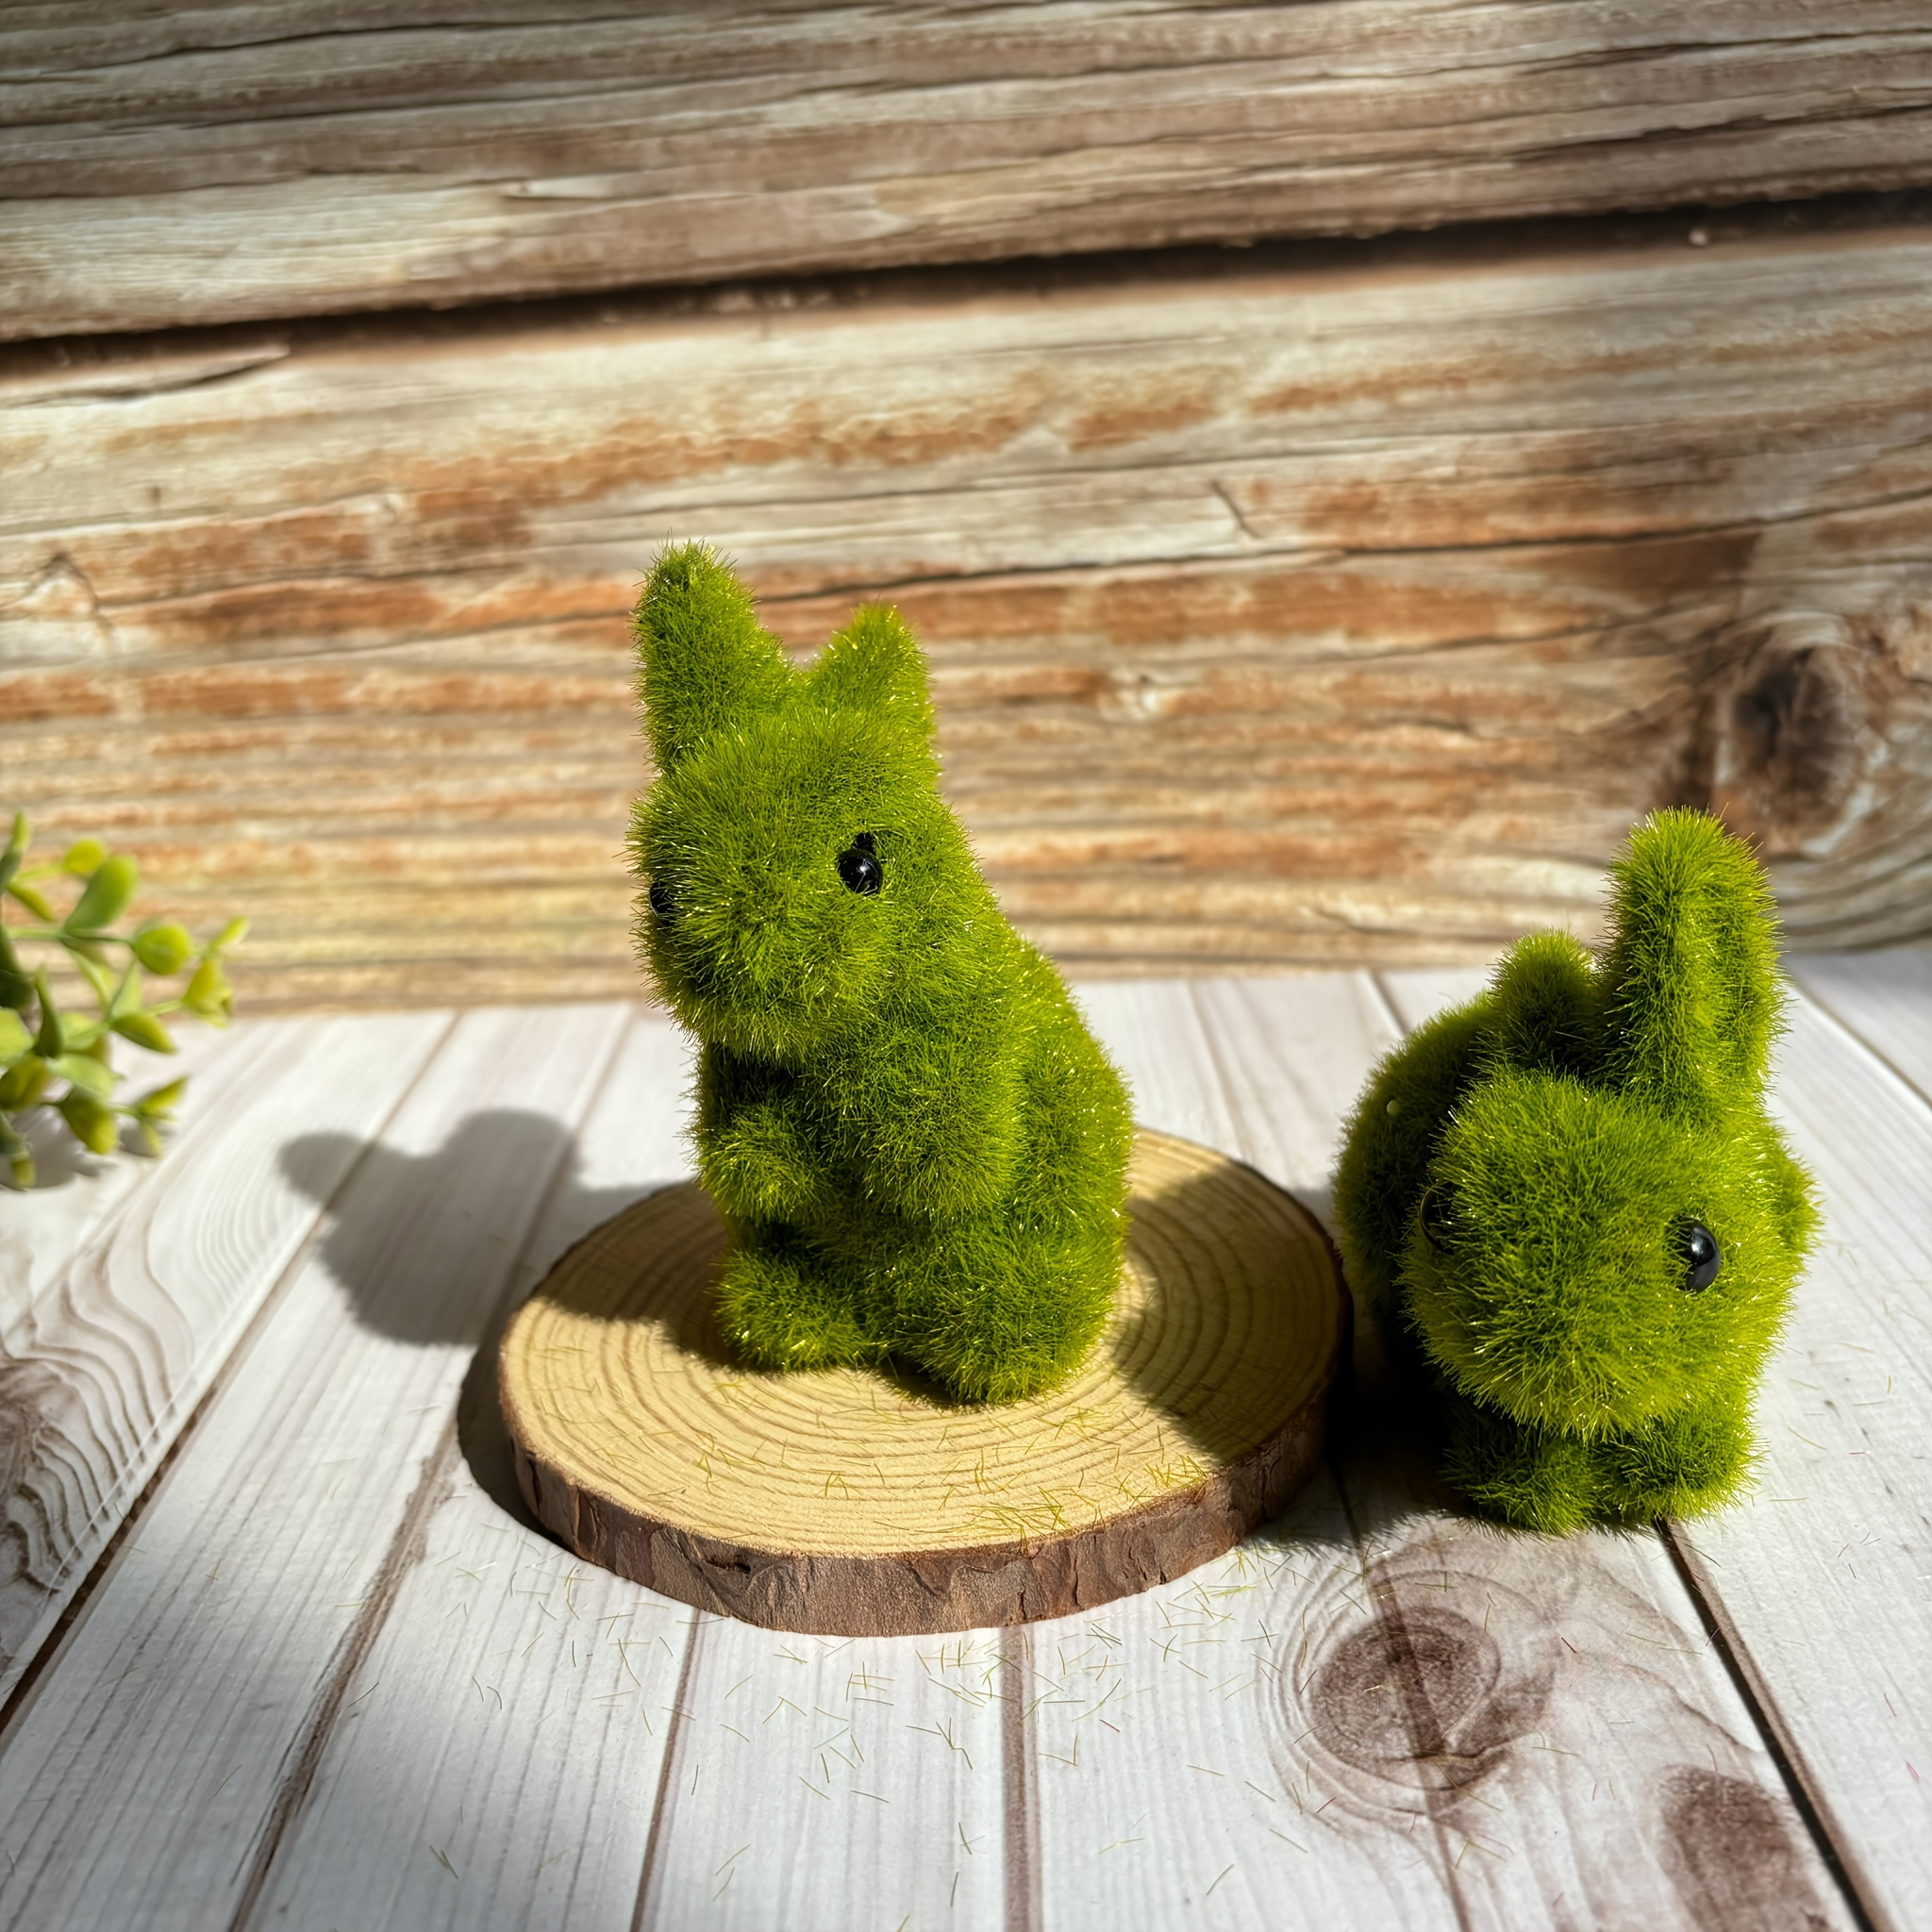 

2pcs, In A Set 10cm(3.9") Classic Green Moss Bunny Flocked Rabbit Statue Figurine, Easter, Spring Garden Decoration, Easter Bunny Statue, Yard Decor, Garden Decor